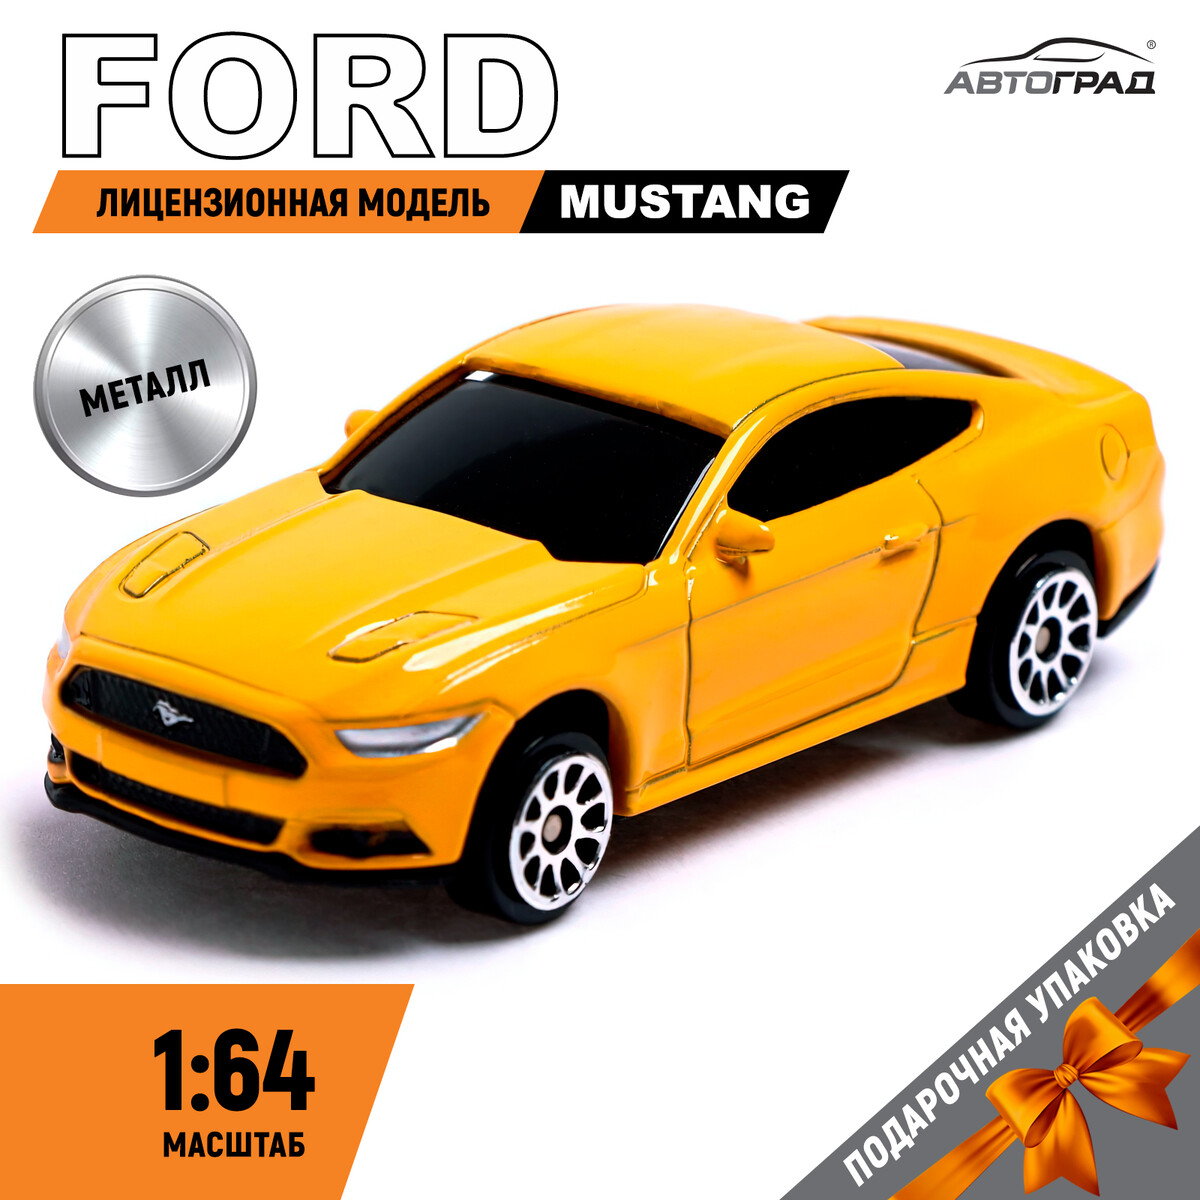 Машина металлическая ford mustang, 1:64, цвет желтый xnrkey remote control key for ford edge fusion expedition explorer mustang m3n a2c93142600 hc3t 15k601 db 315 433 92 868 902mhz